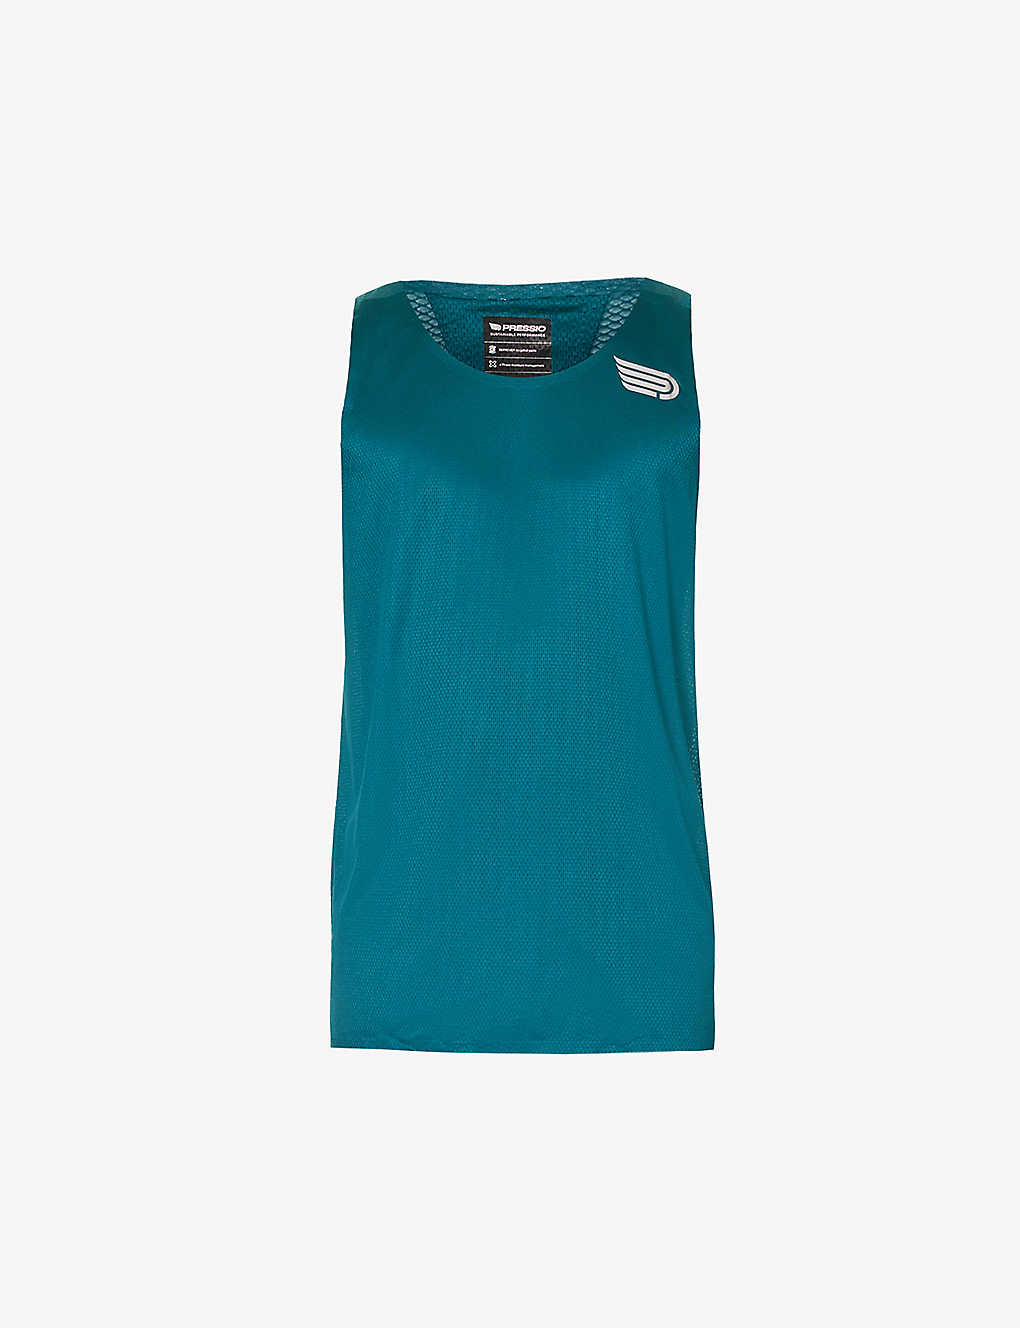 Pressio Womens Spruce Elite Singlet Scoop-neck Recycled-polyester Top